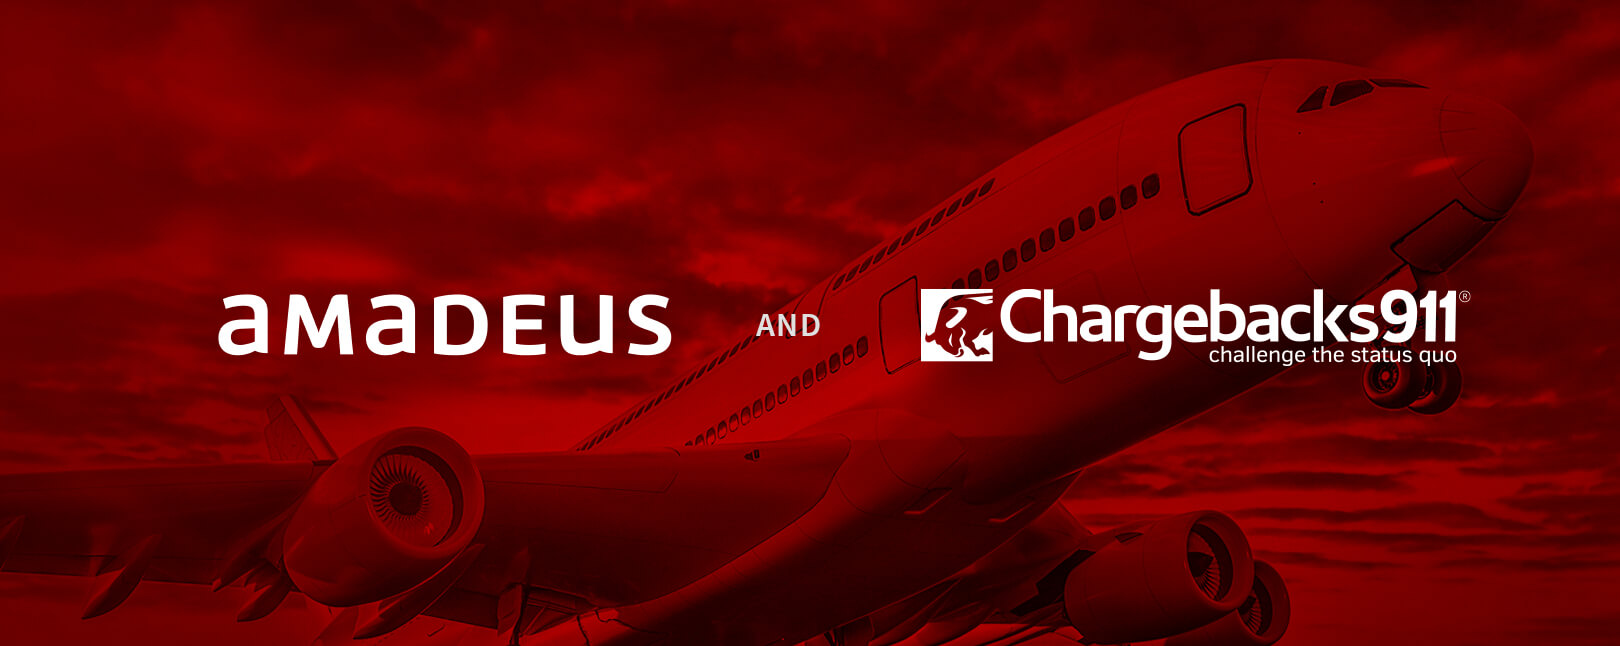 Amadeus & Chargebacks911 Join Forces to Help Airlines Handle Rise in Disputes